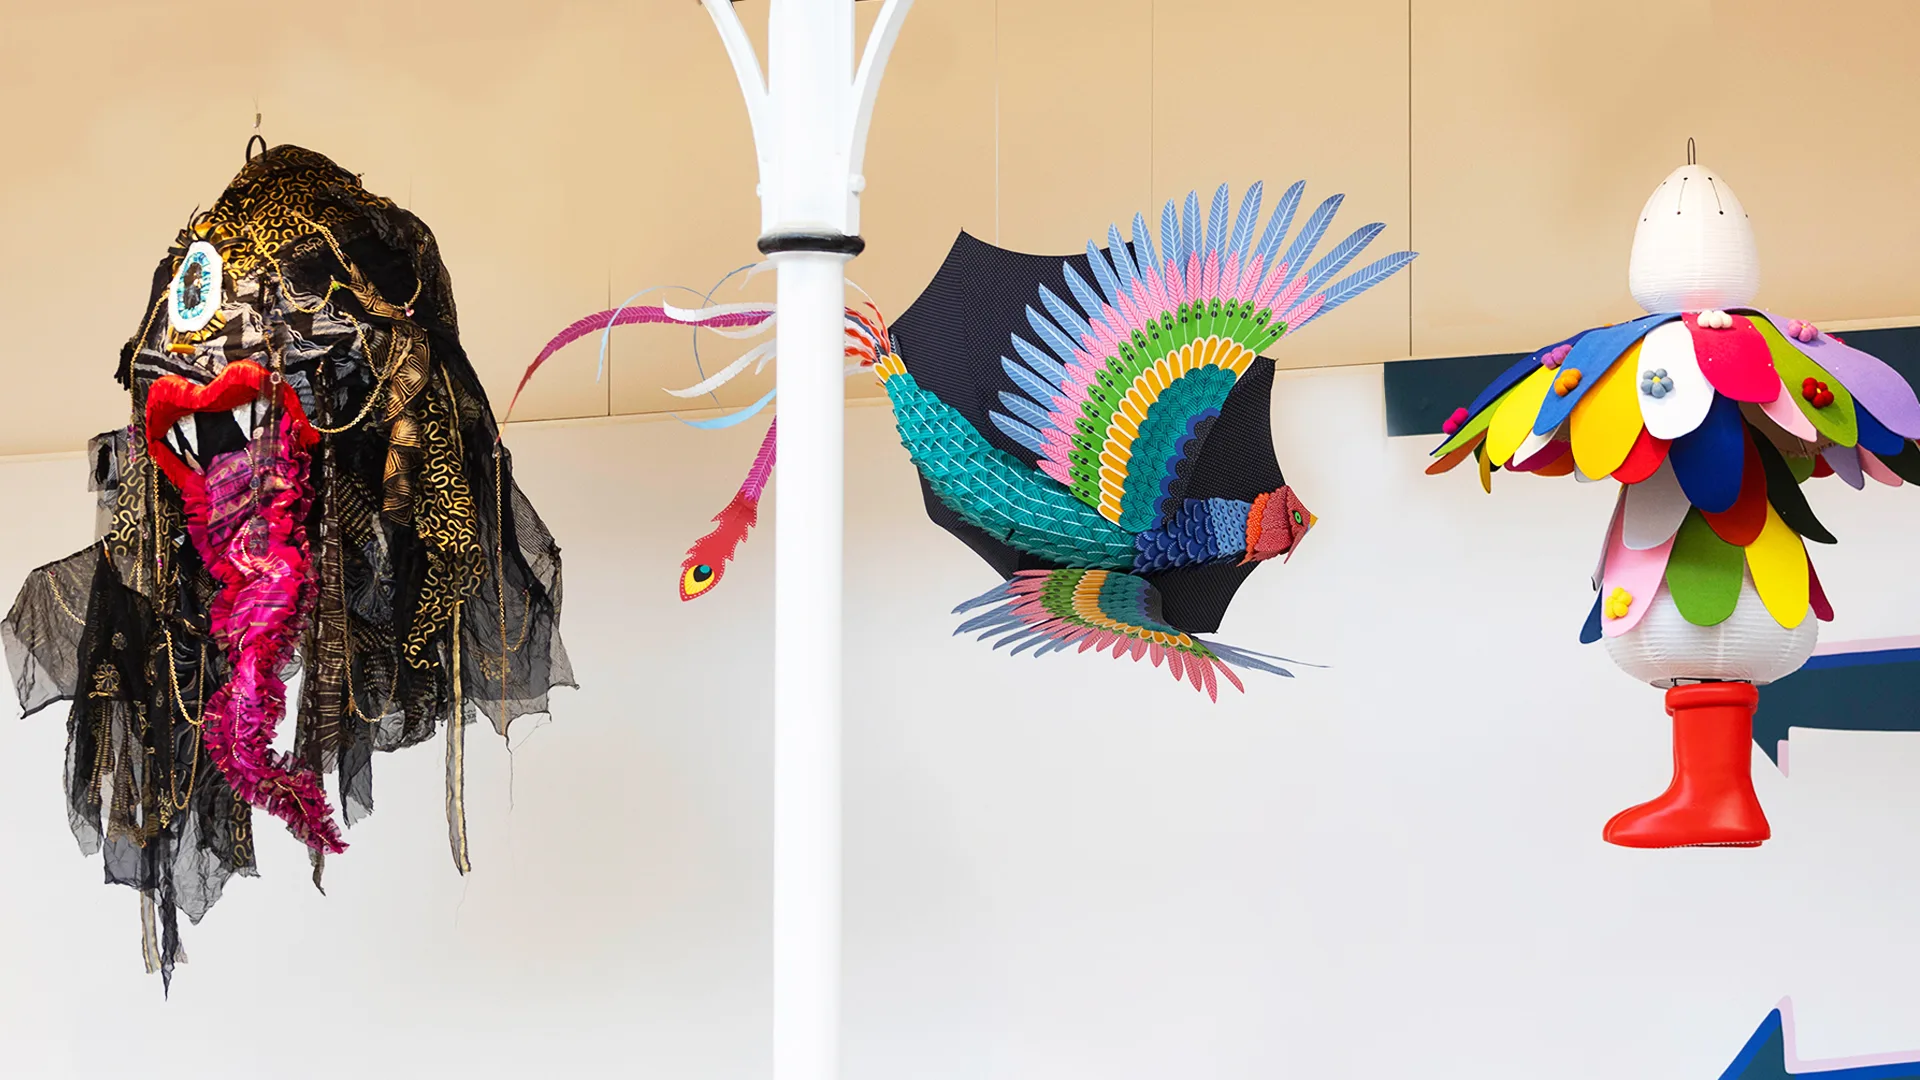 3 3d Yōkai hang from the ceiling at Young V&A museum, they are 3 Yōkai made from umbrellas. 1 is large and black with a big pink tongue, the second is a colourful bird, the third is one that looks like a human figure with a large flower for a head